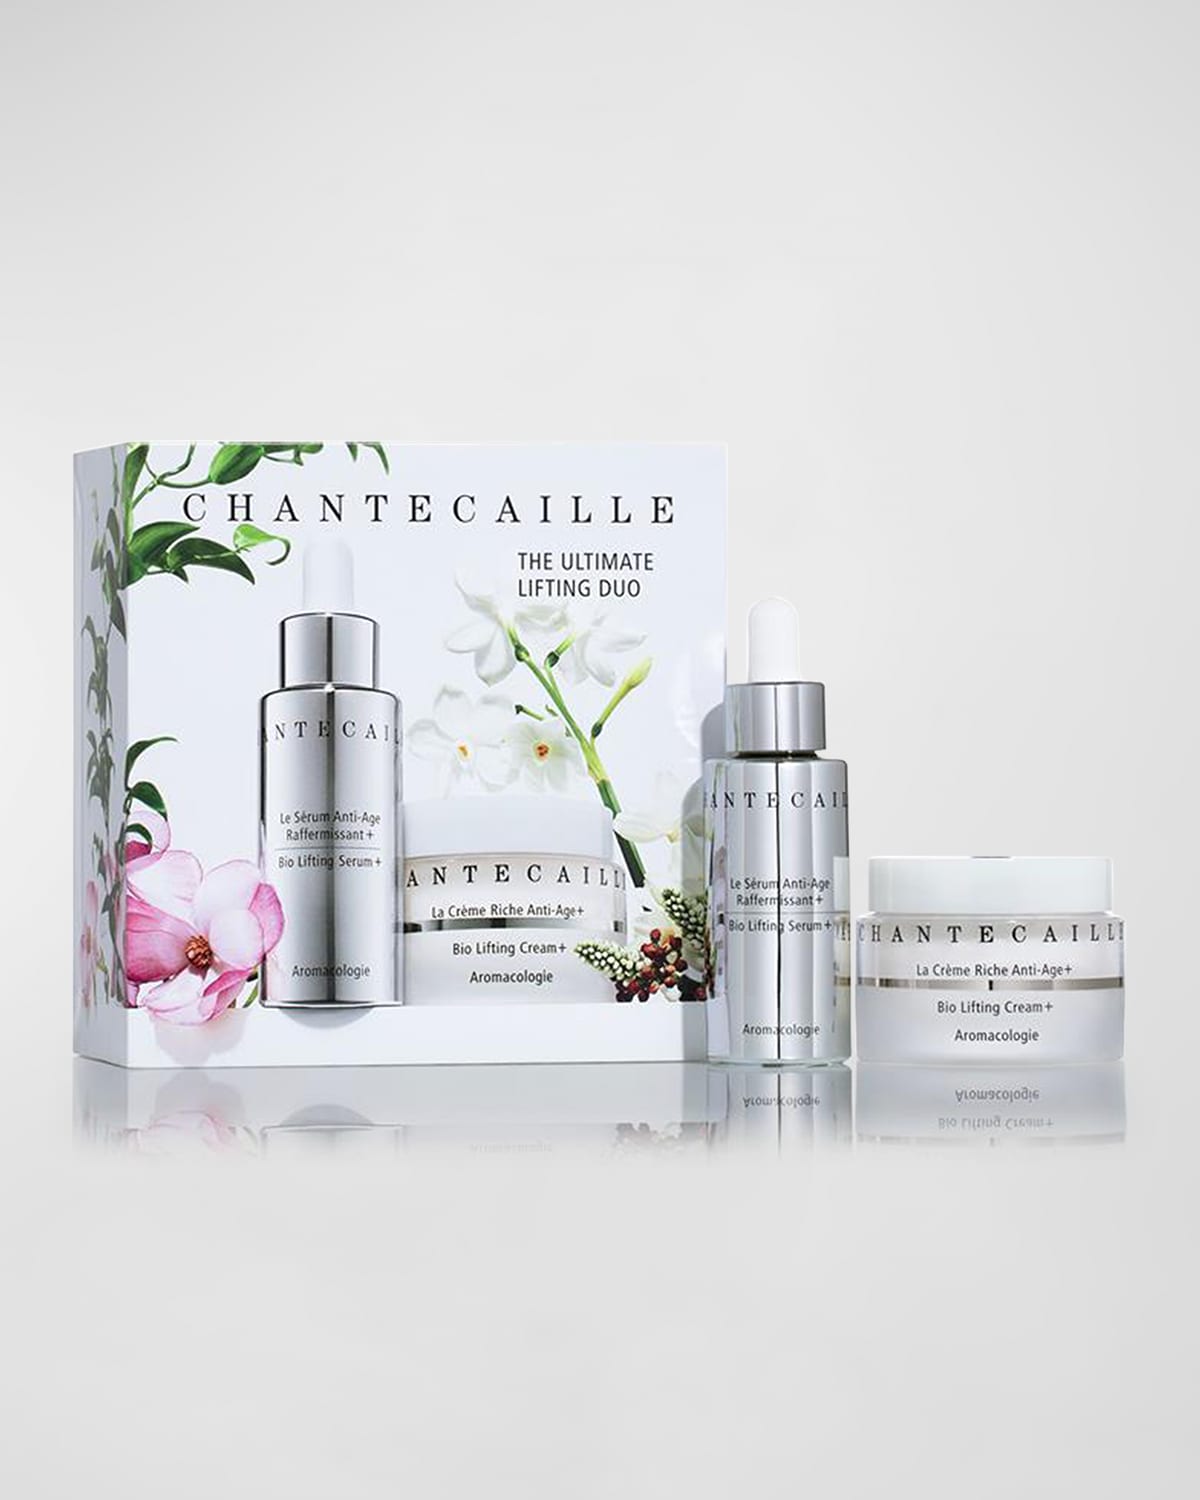 Chantecaille Limited Edition The Ultimate Lifting Duo